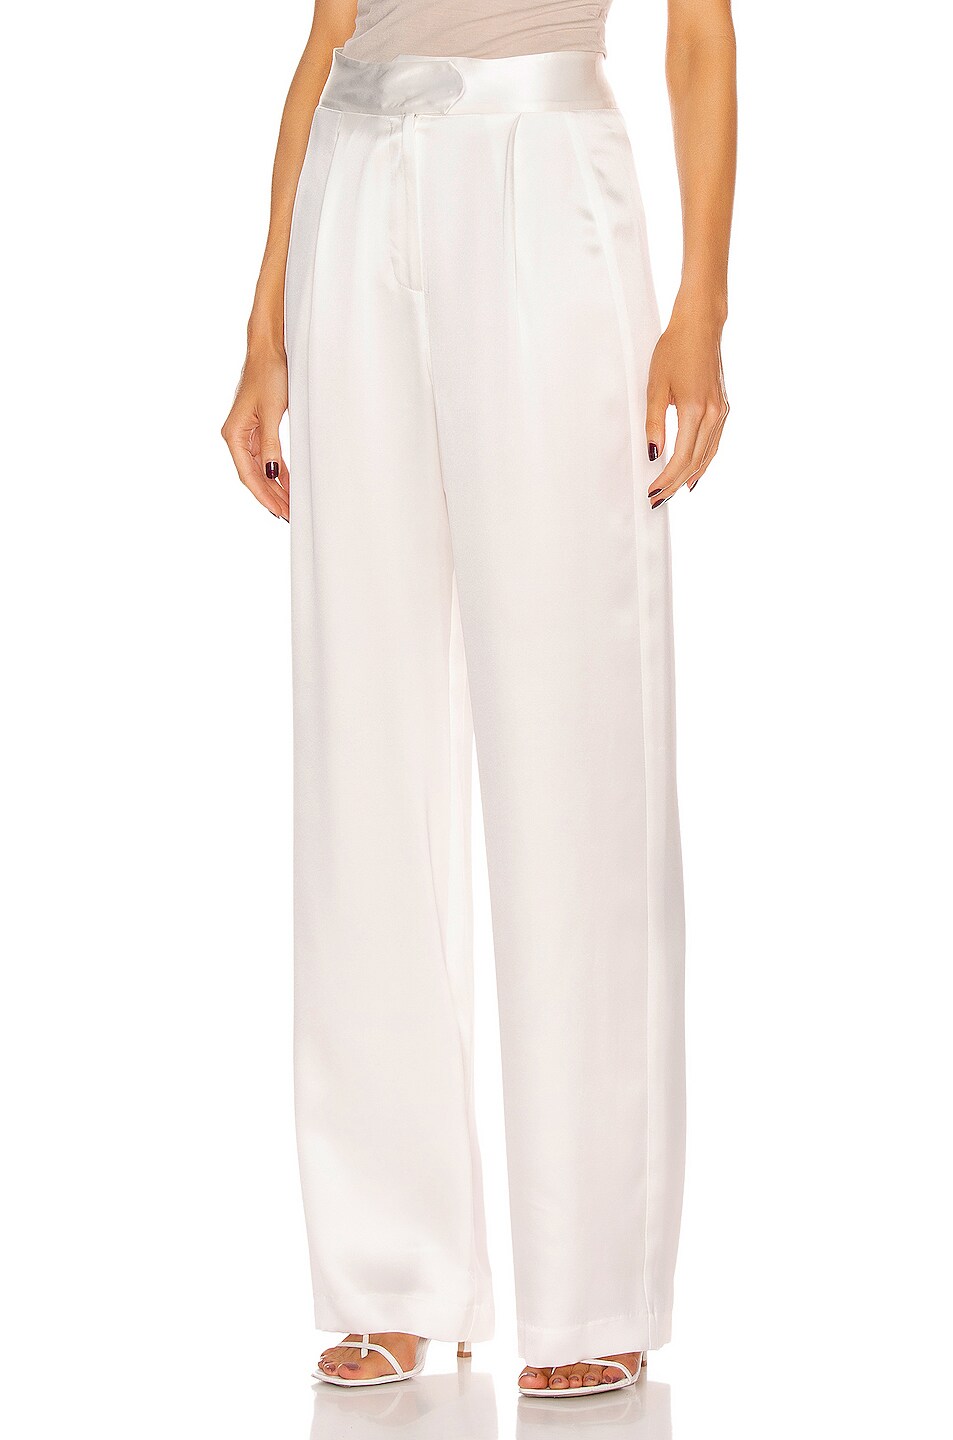 Image 1 of Michelle Mason Wide Leg Trouser in Ivory